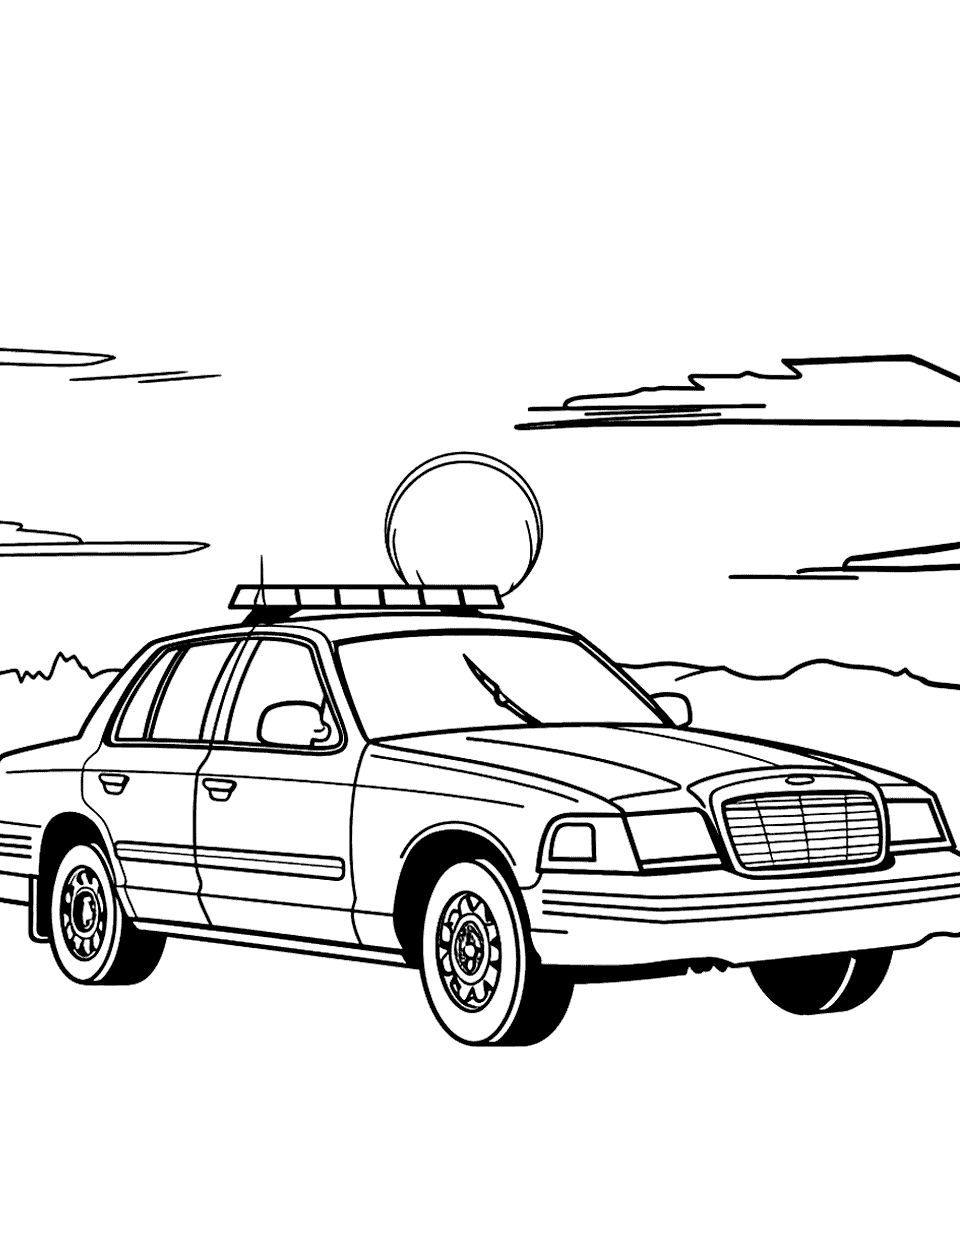 Police Car at Sunset Coloring Page - A serene scene of a police car parked as the sun sets in the background.